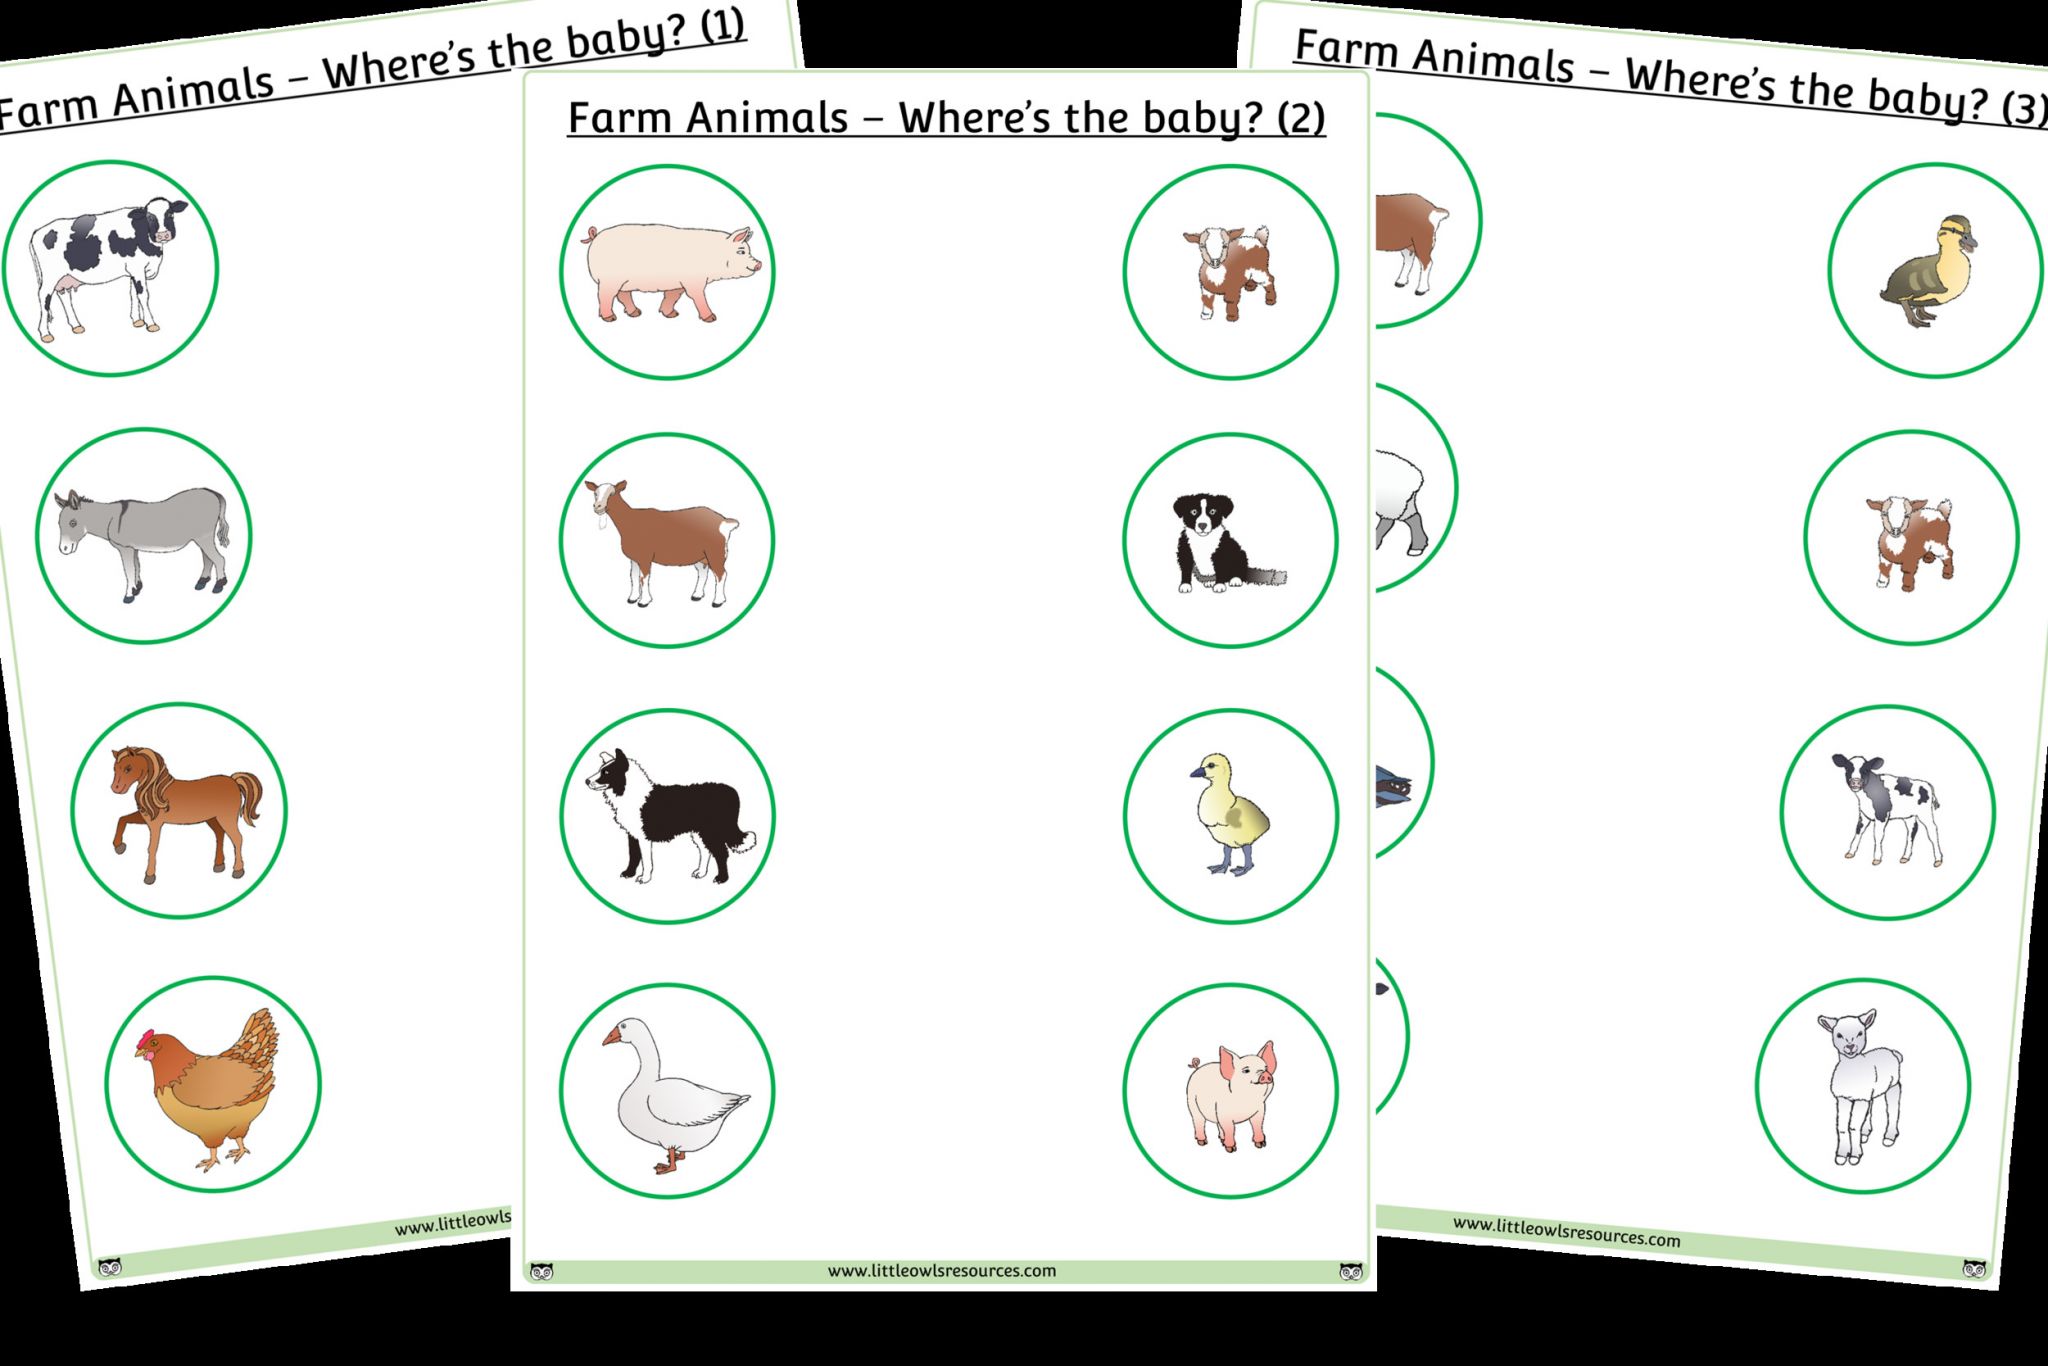 match the farm animals to their babies